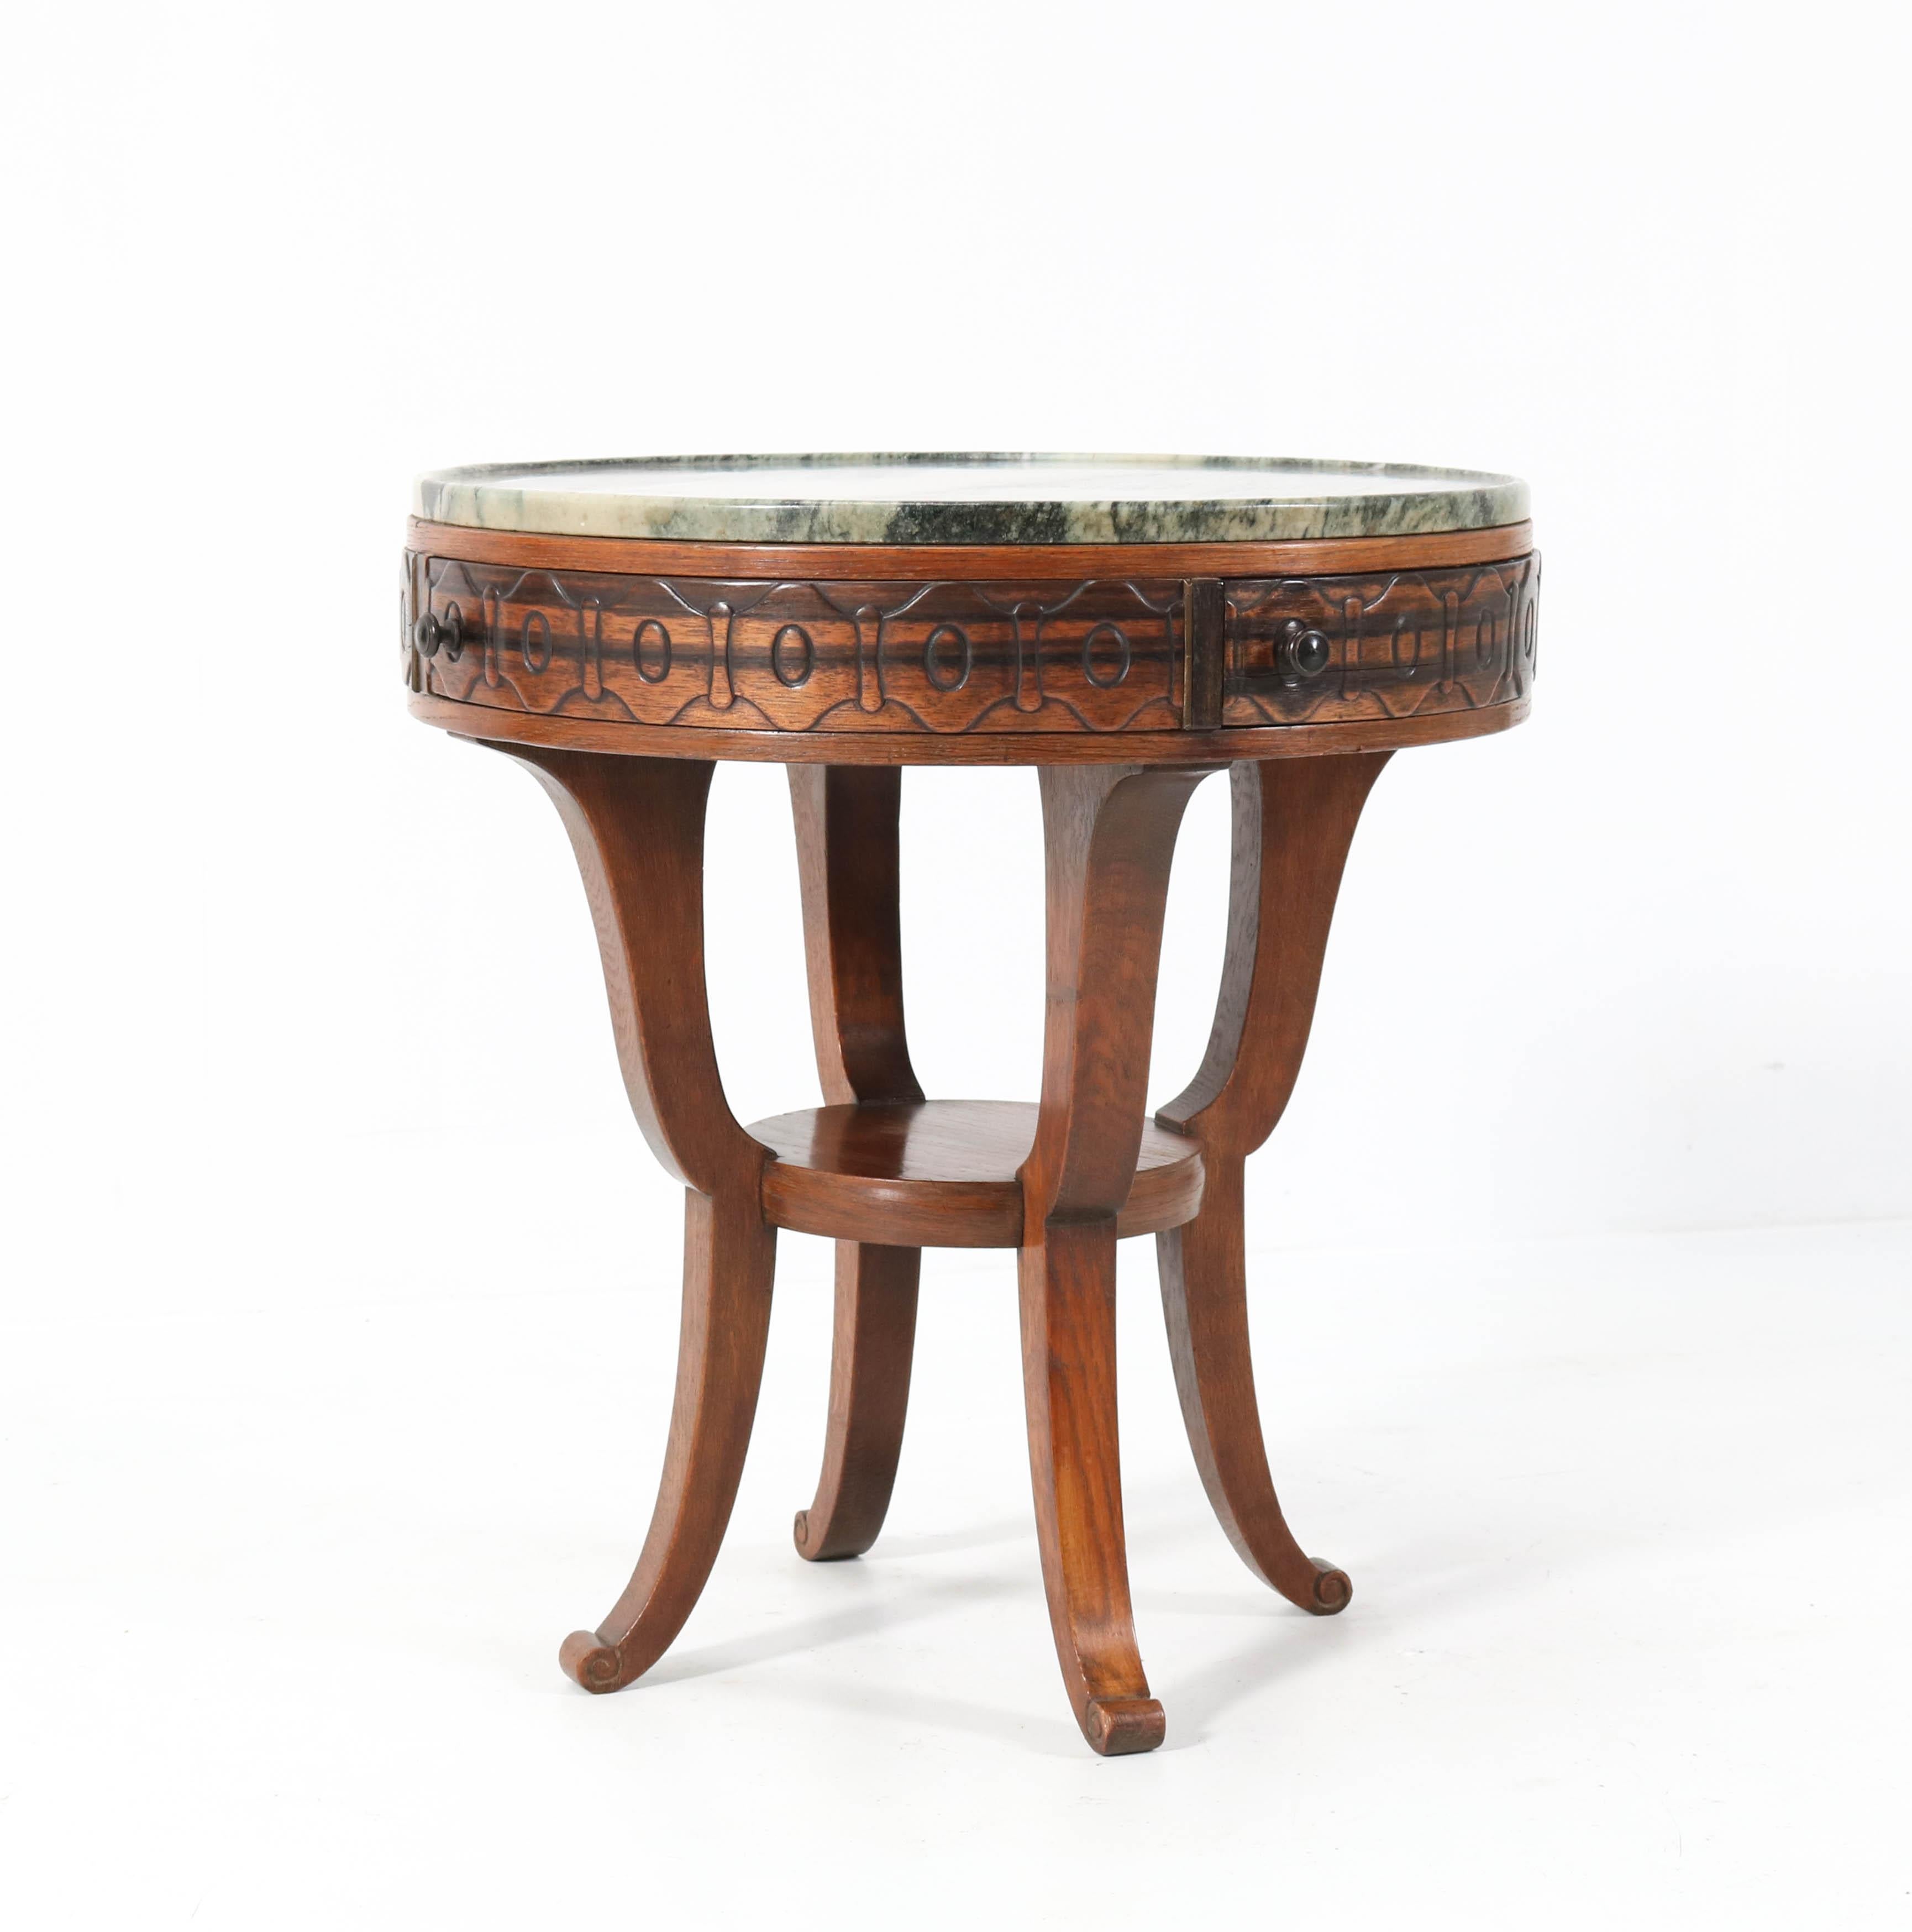 Marble Oak Art Deco Amsterdamse School Coffee Table by 't Woonhuys Amsterdam, 1920s For Sale